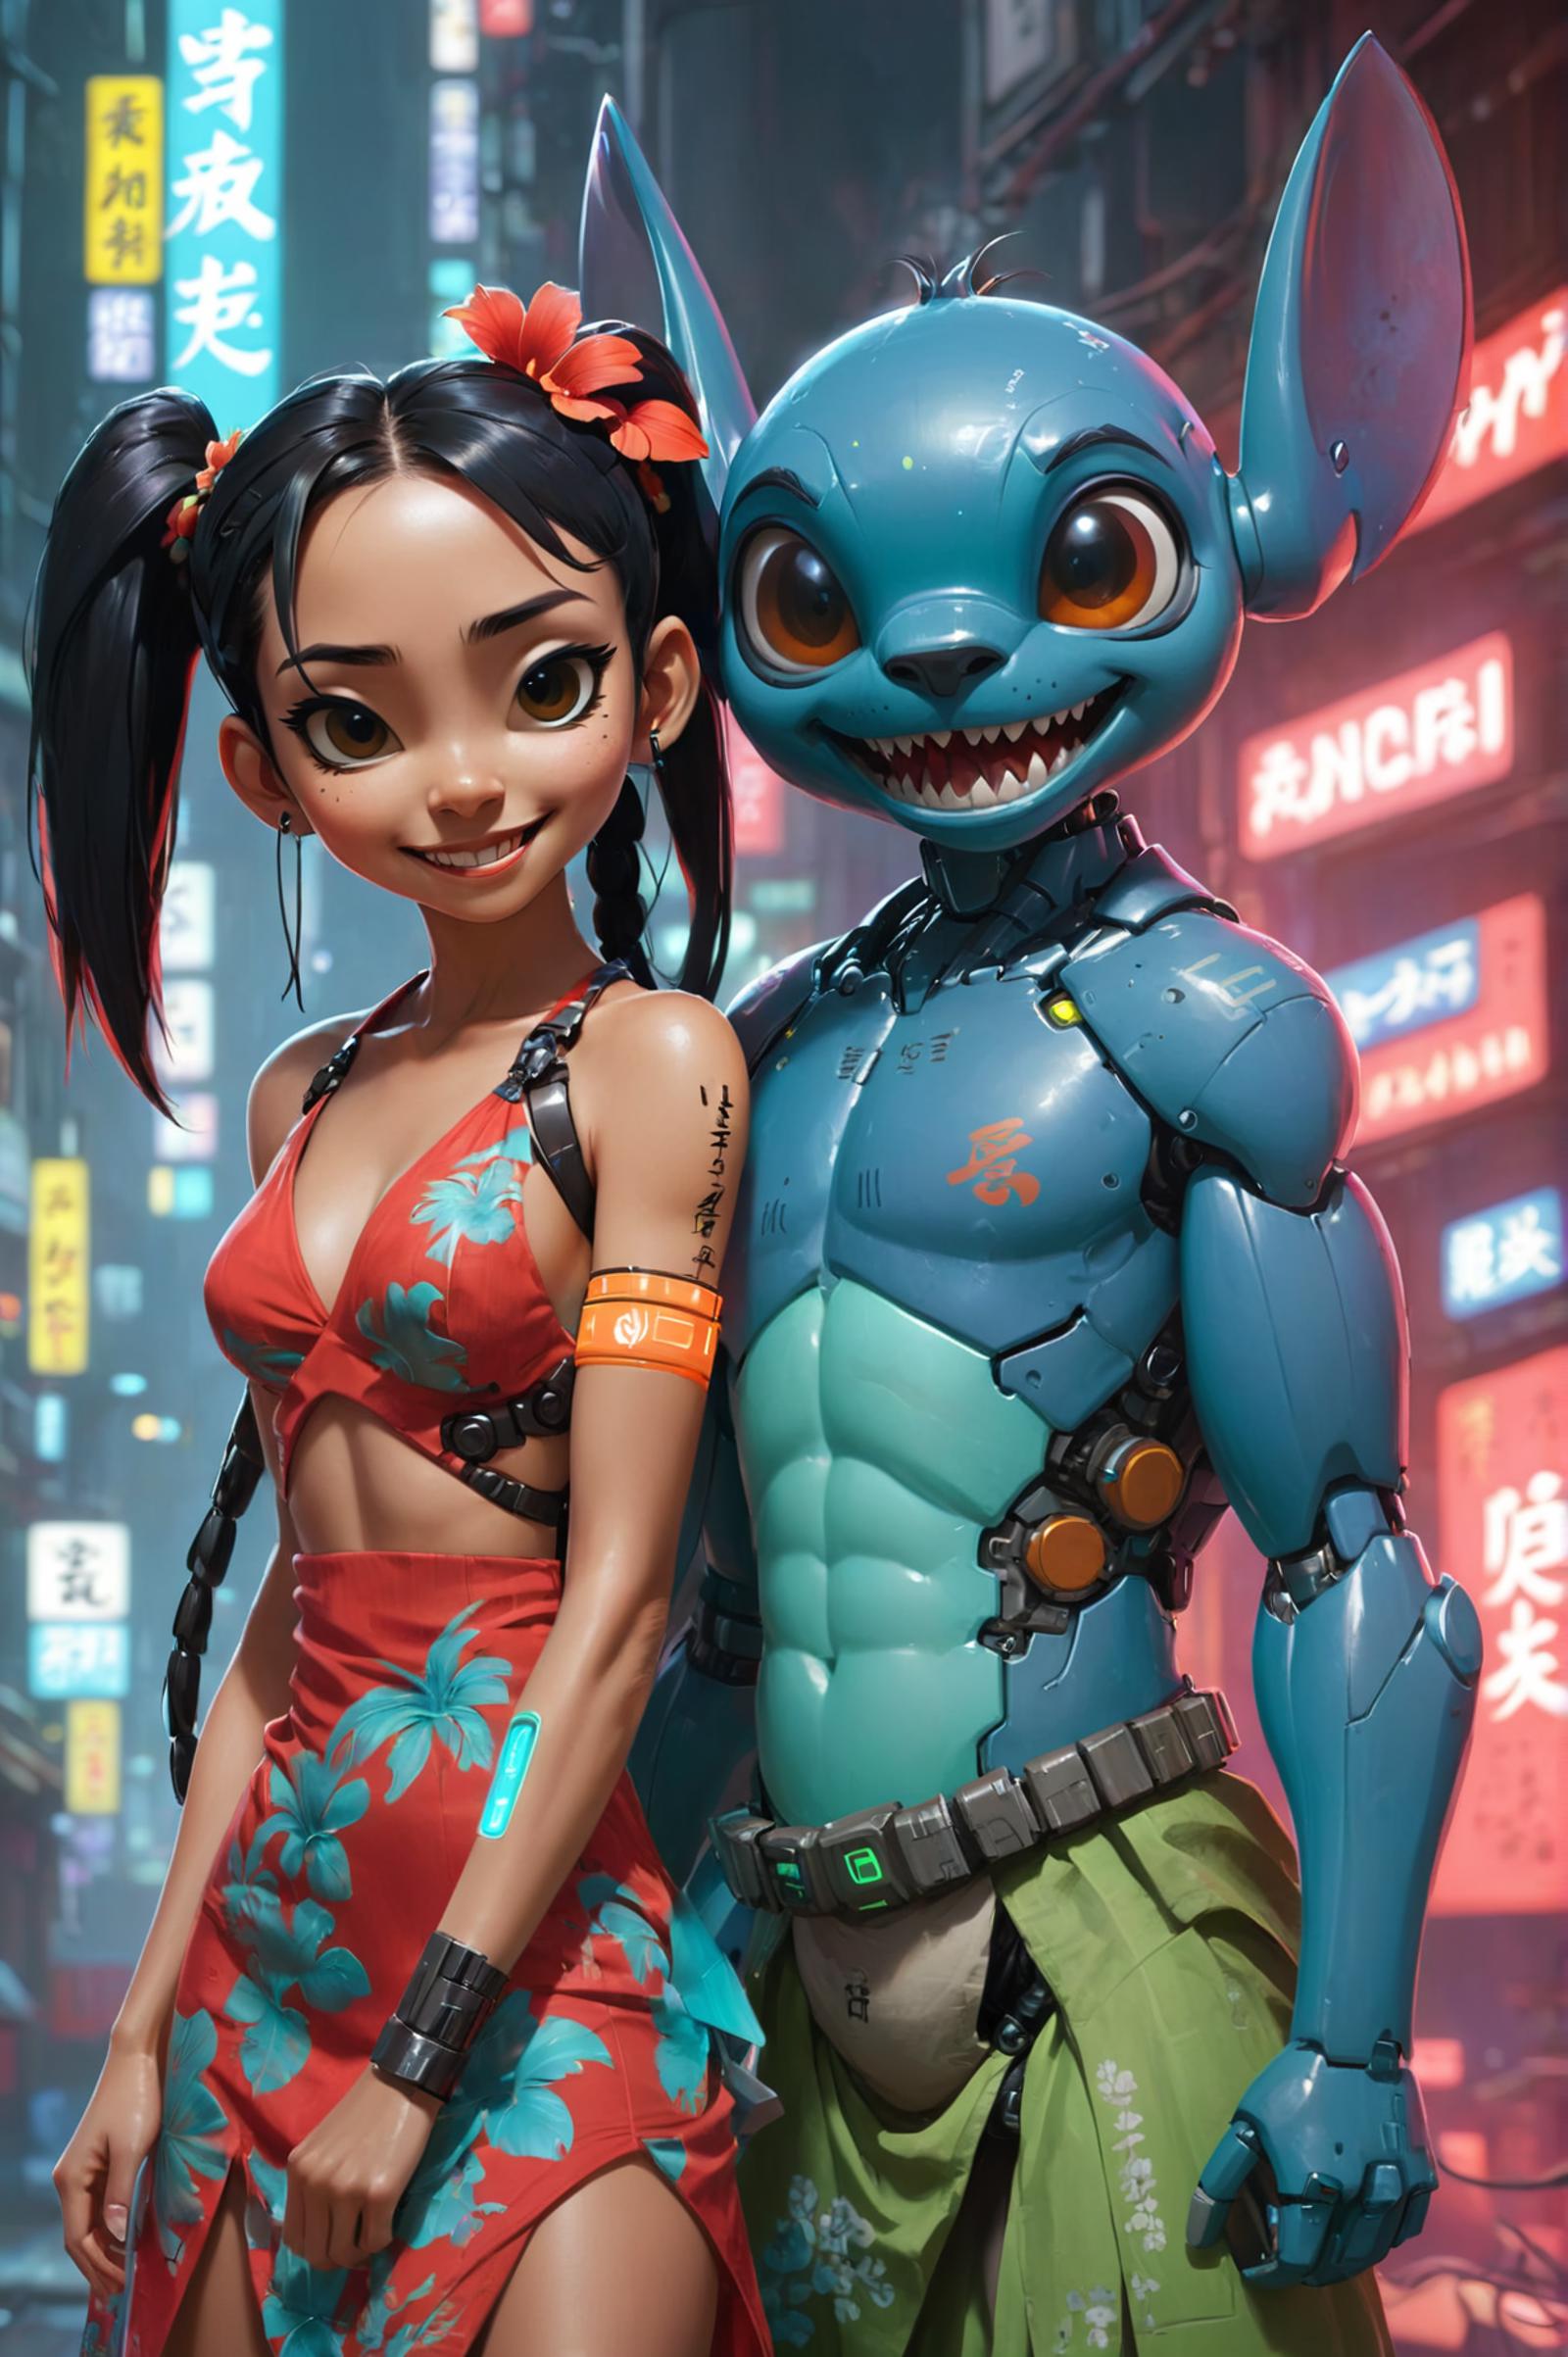 A cartoon robot with a shark mouth and a girl pose for a picture together.